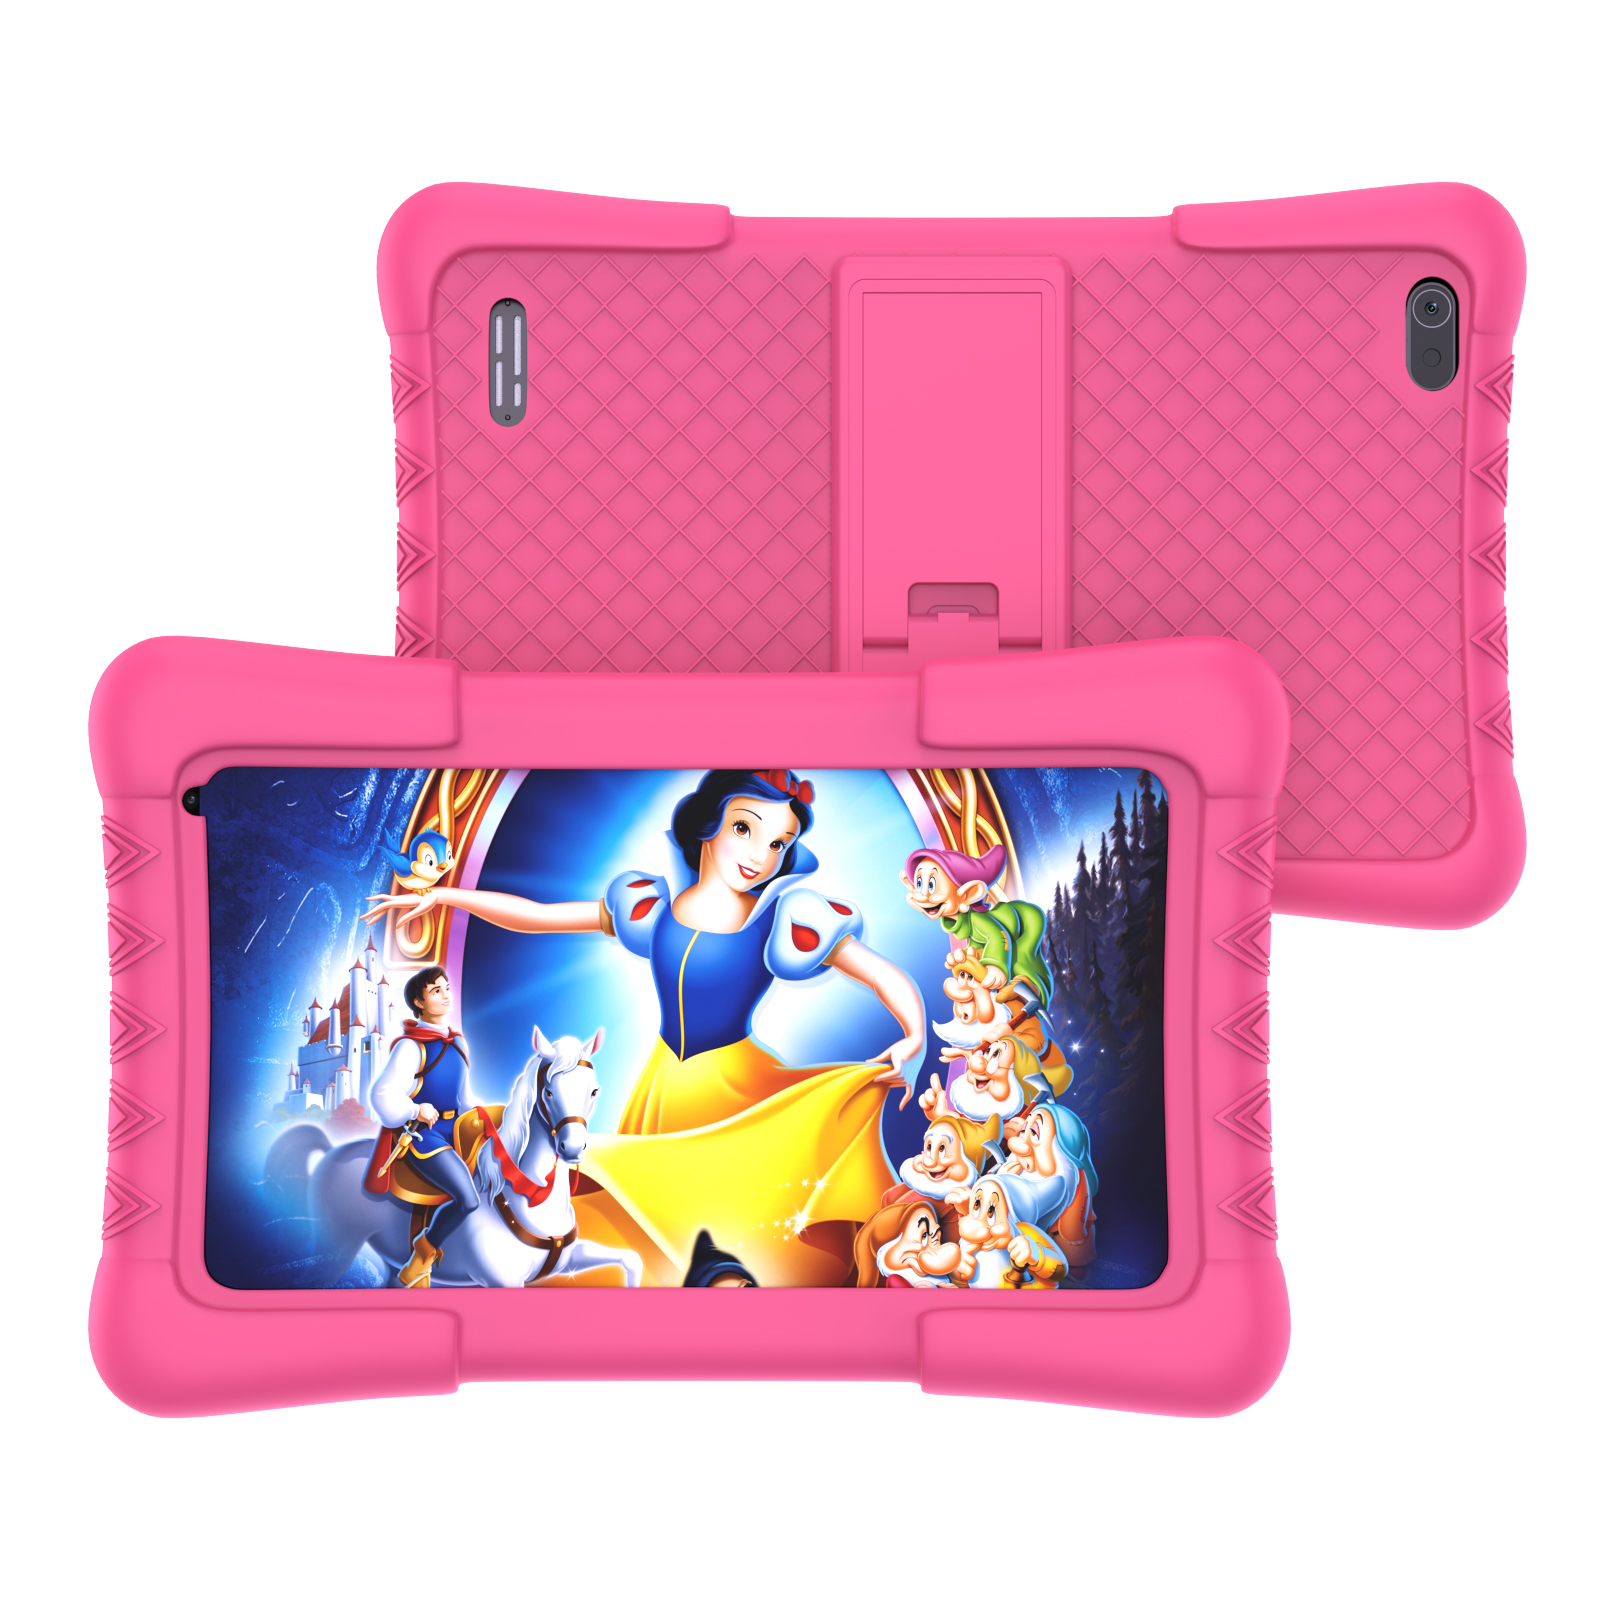 MAGCH Kids Tablet 7 inch, 2GB RAM, 32GB ROM, Android 11, Kids App Pre Installed, 1.8GHz Quad Core Processor, IPS HD Display, 7” Android Tablet, WiFi, Kid-Proof Case, Pink